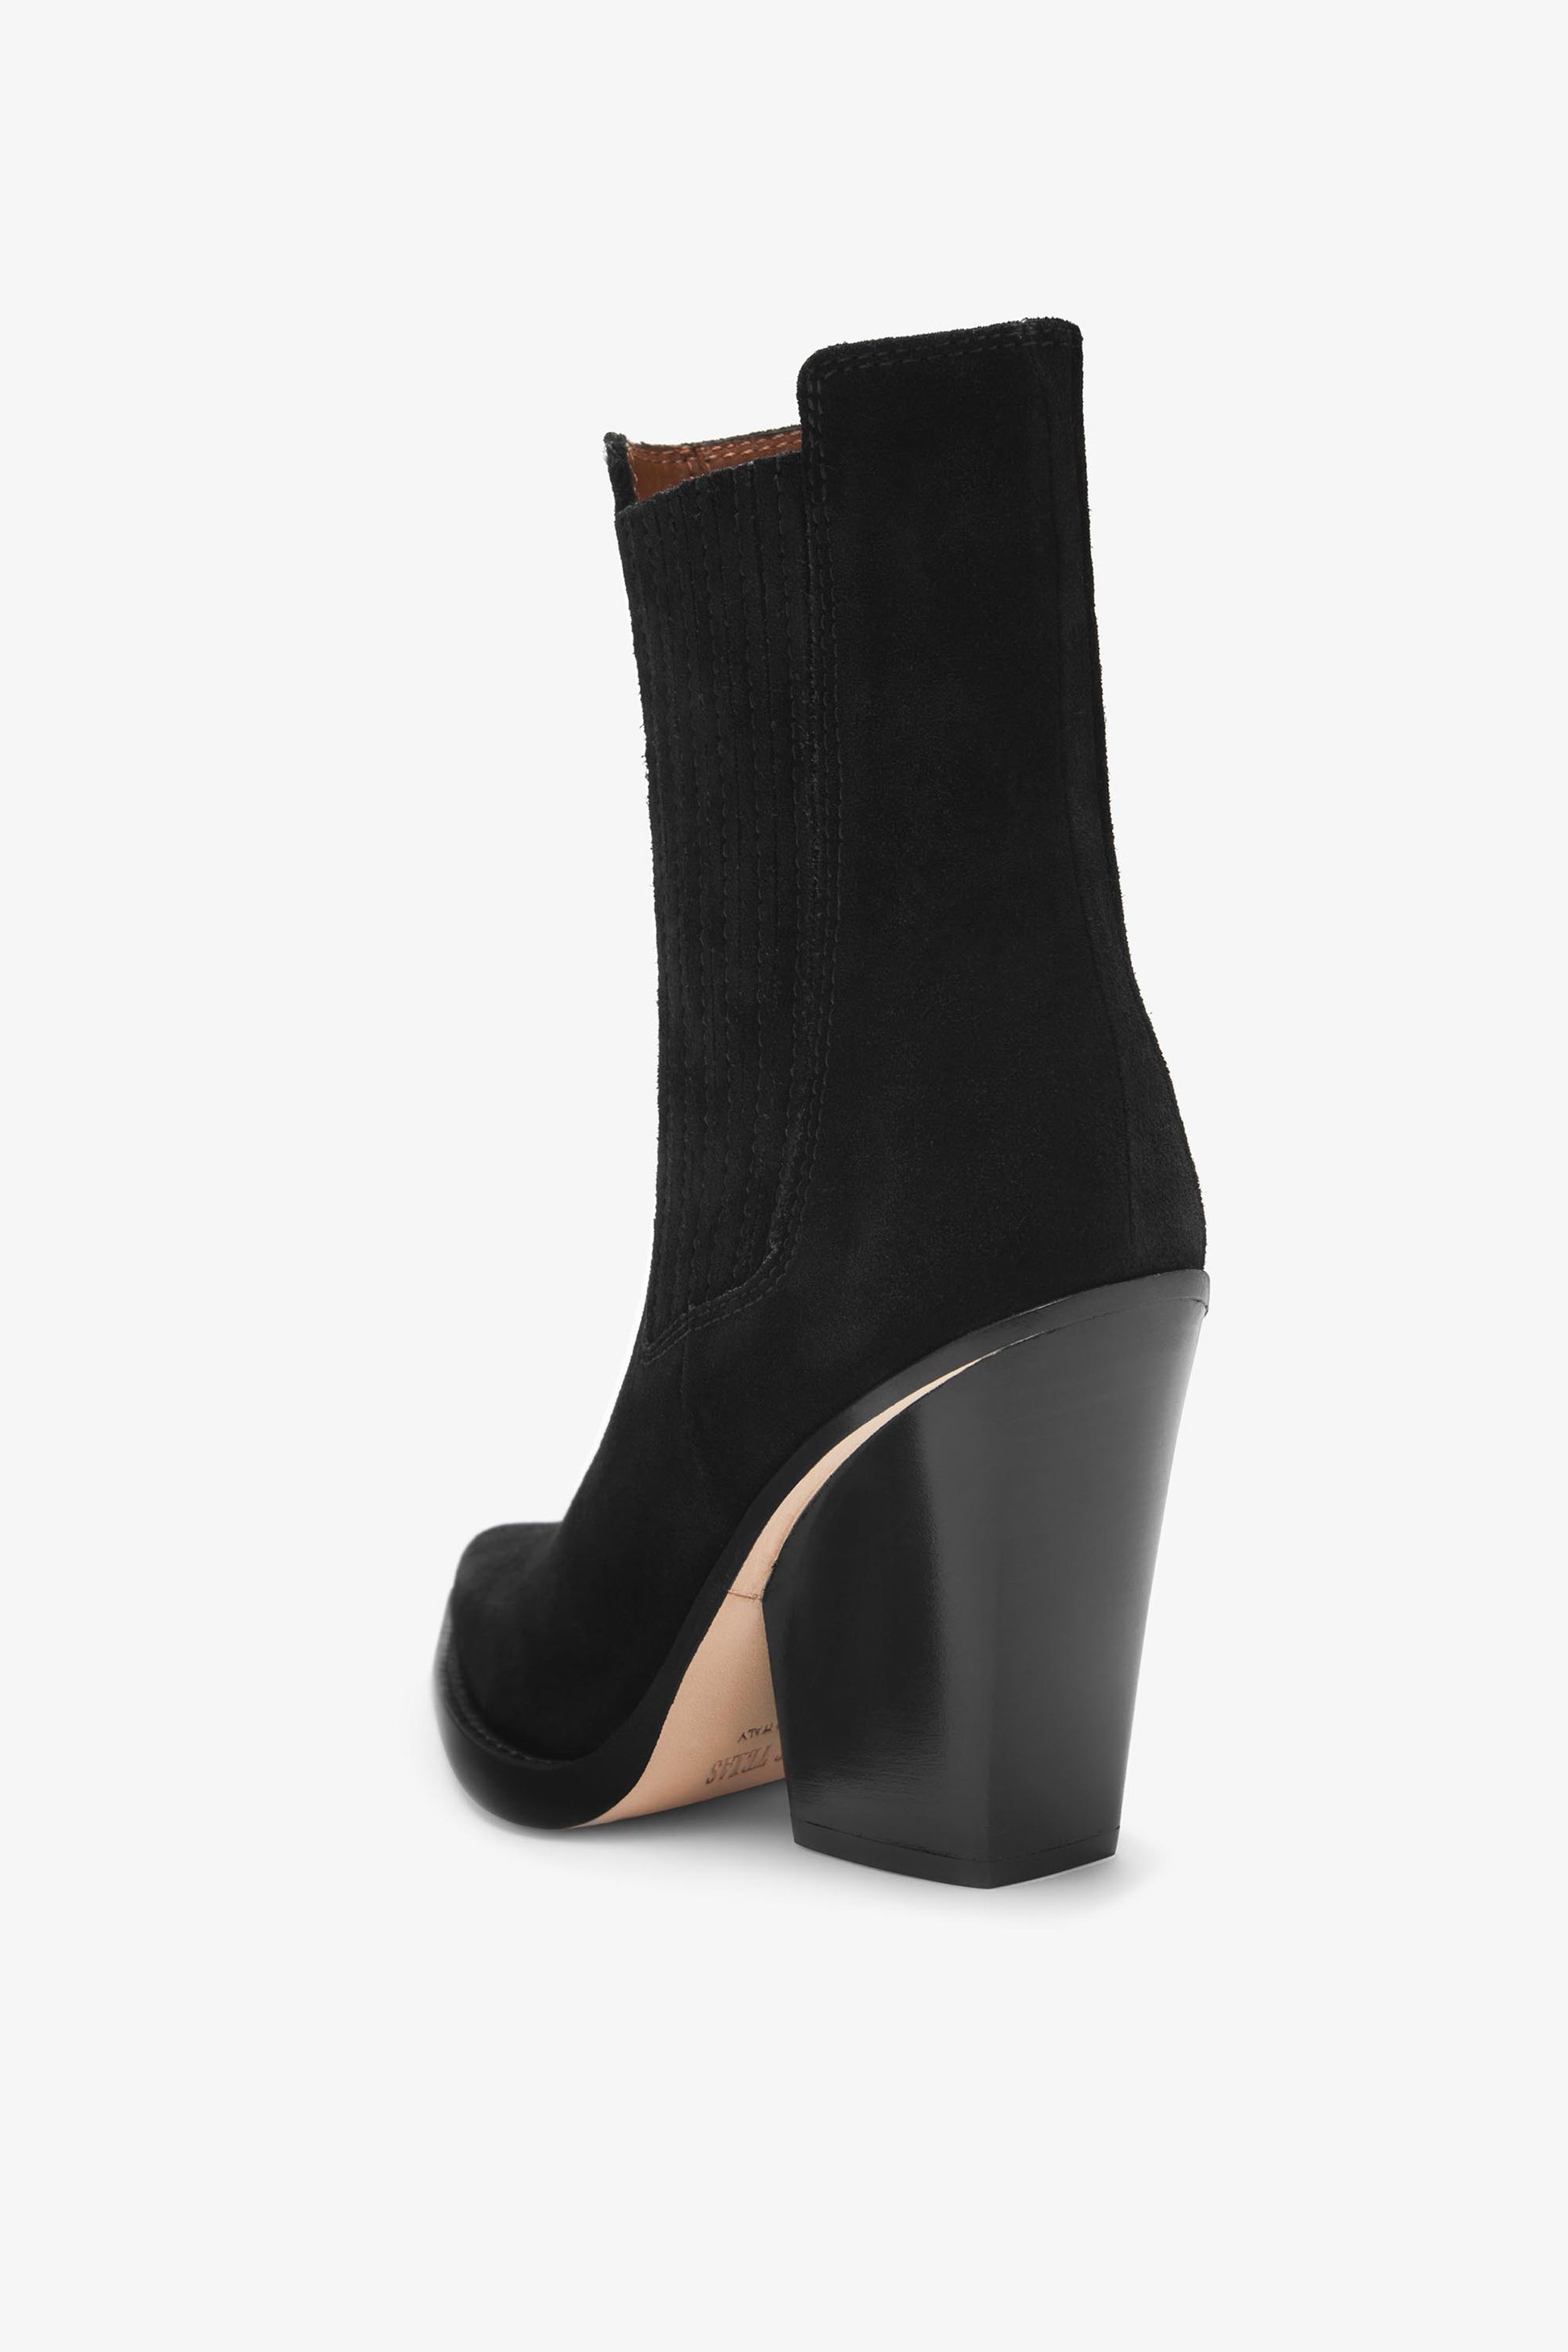 Black calf suede ankle boots